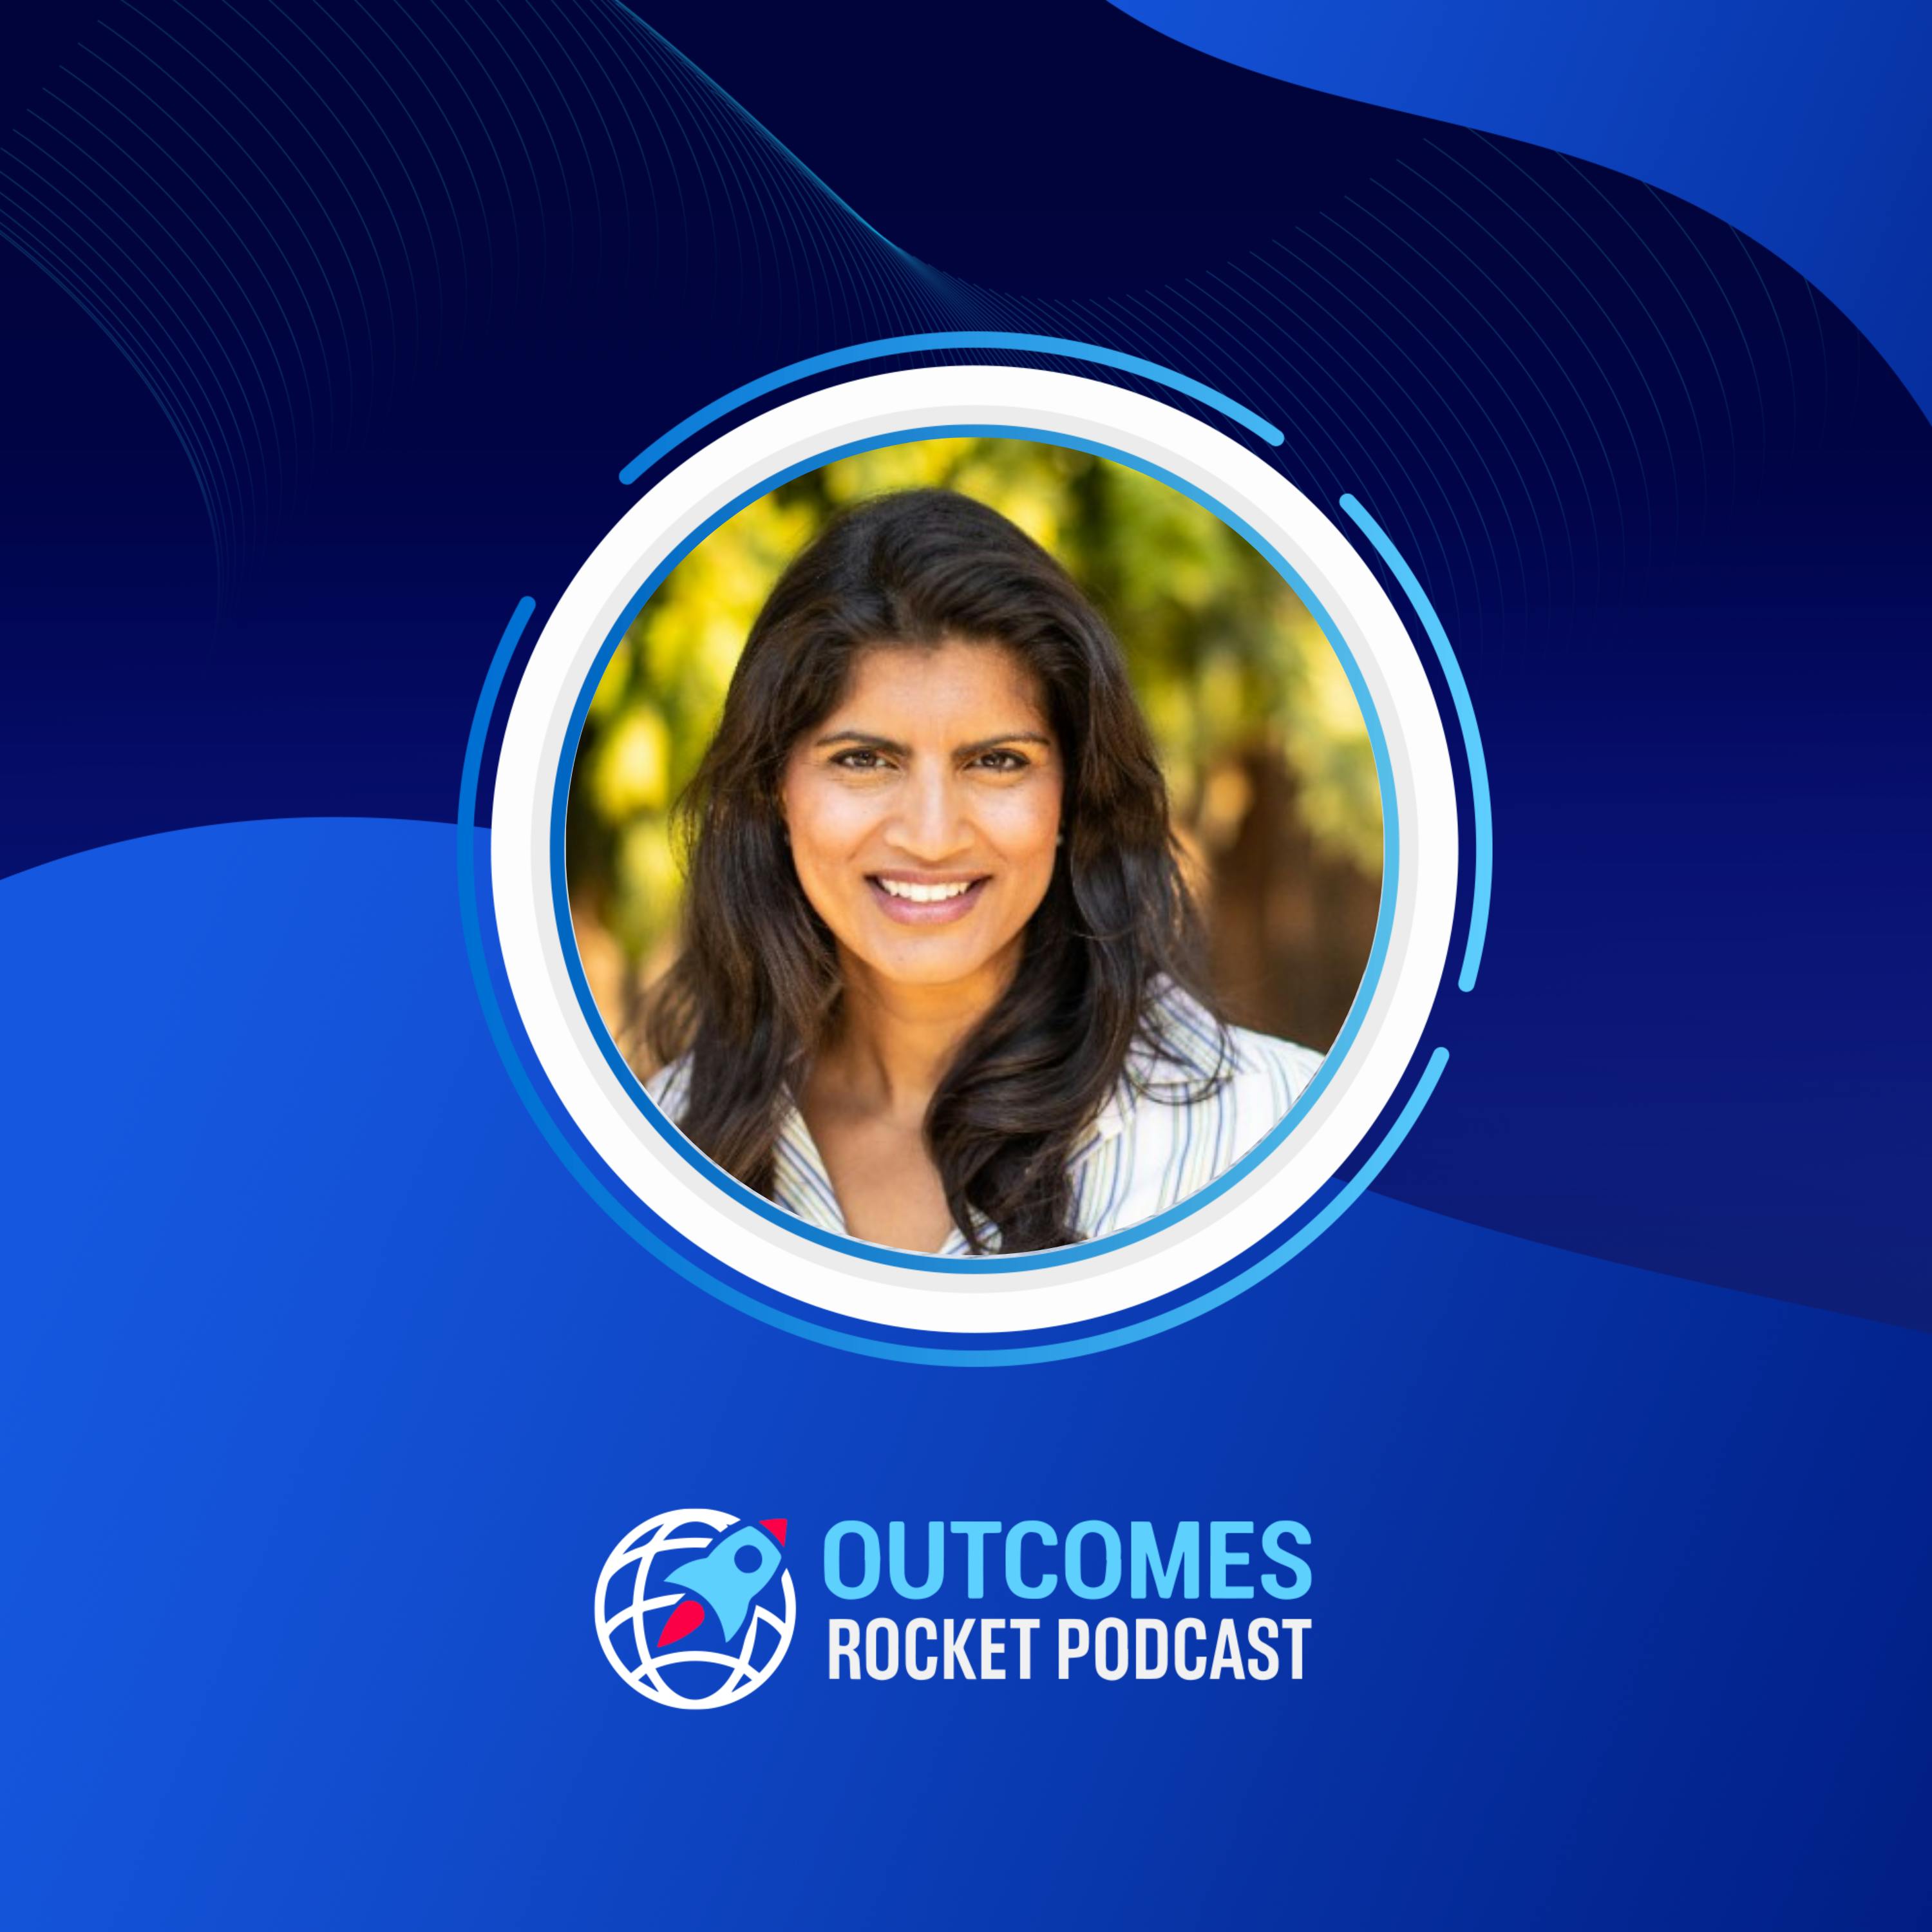 Amplifying Access: Pioneering Healthcare Innovation with Meena Mallipeddi, Co-founder and CEO of Amplify MD.